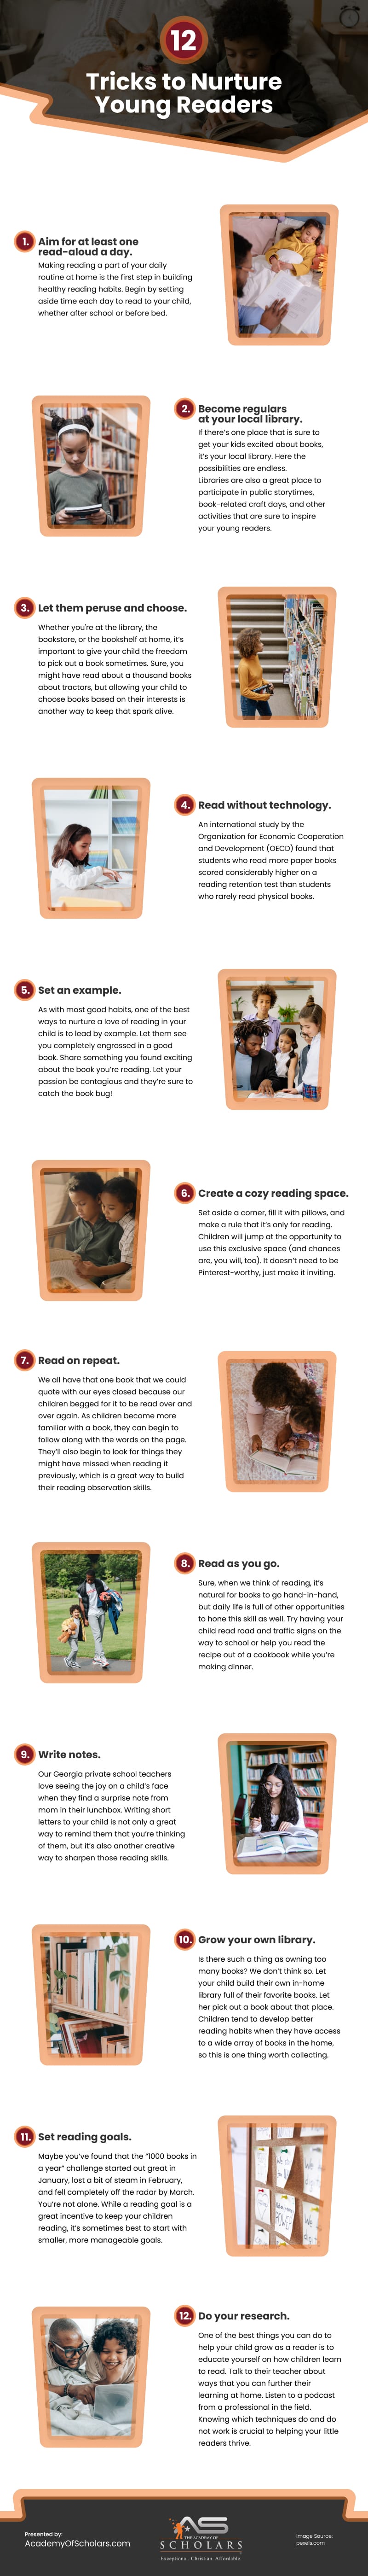 12 Tricks for Nurturing Young Readers Infographic